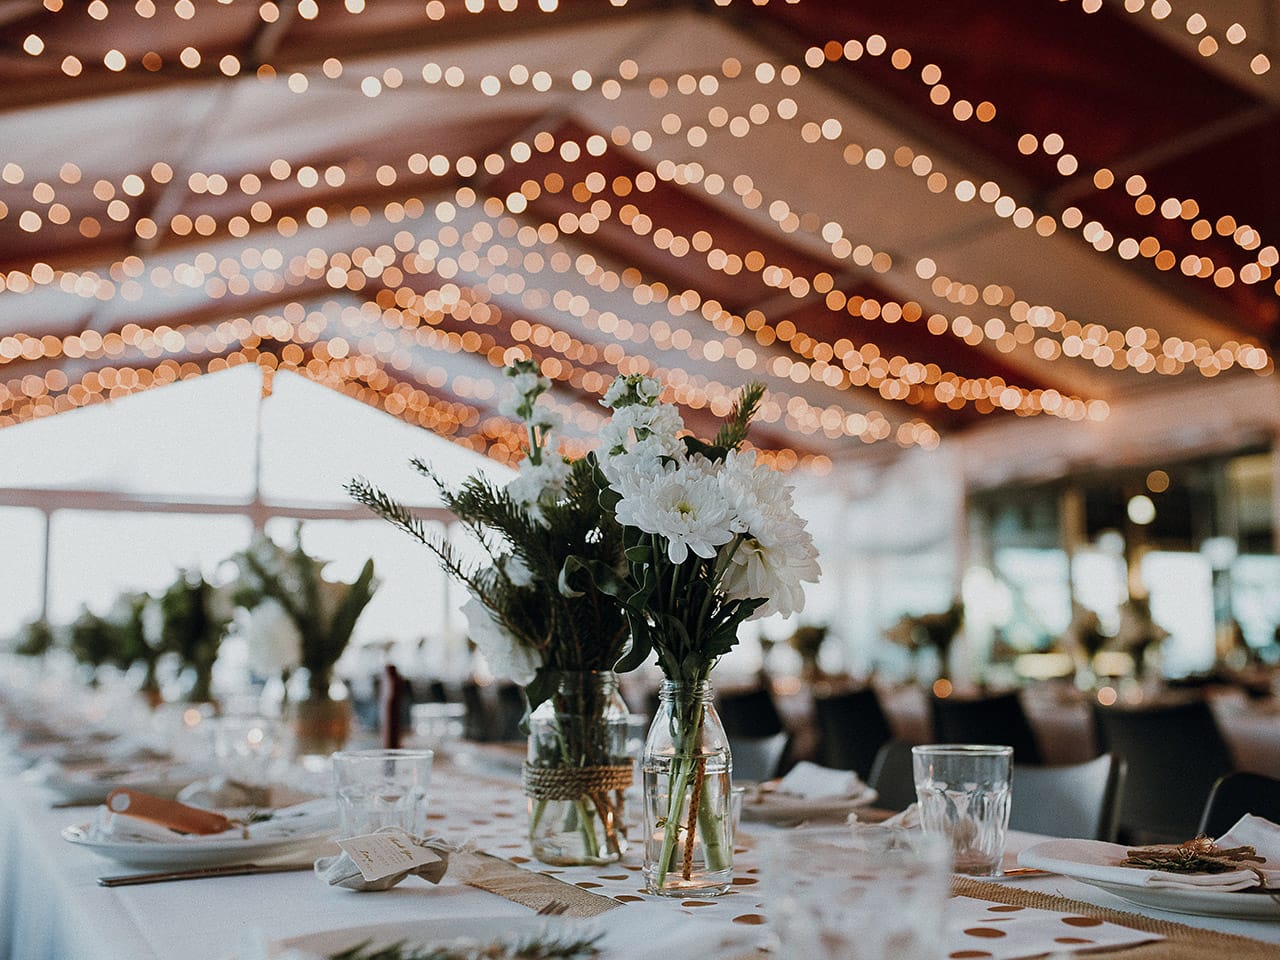 Inside the Function Room with Flower Centerpieces in Long Tables, String Lights and Drapings on the Ceiling